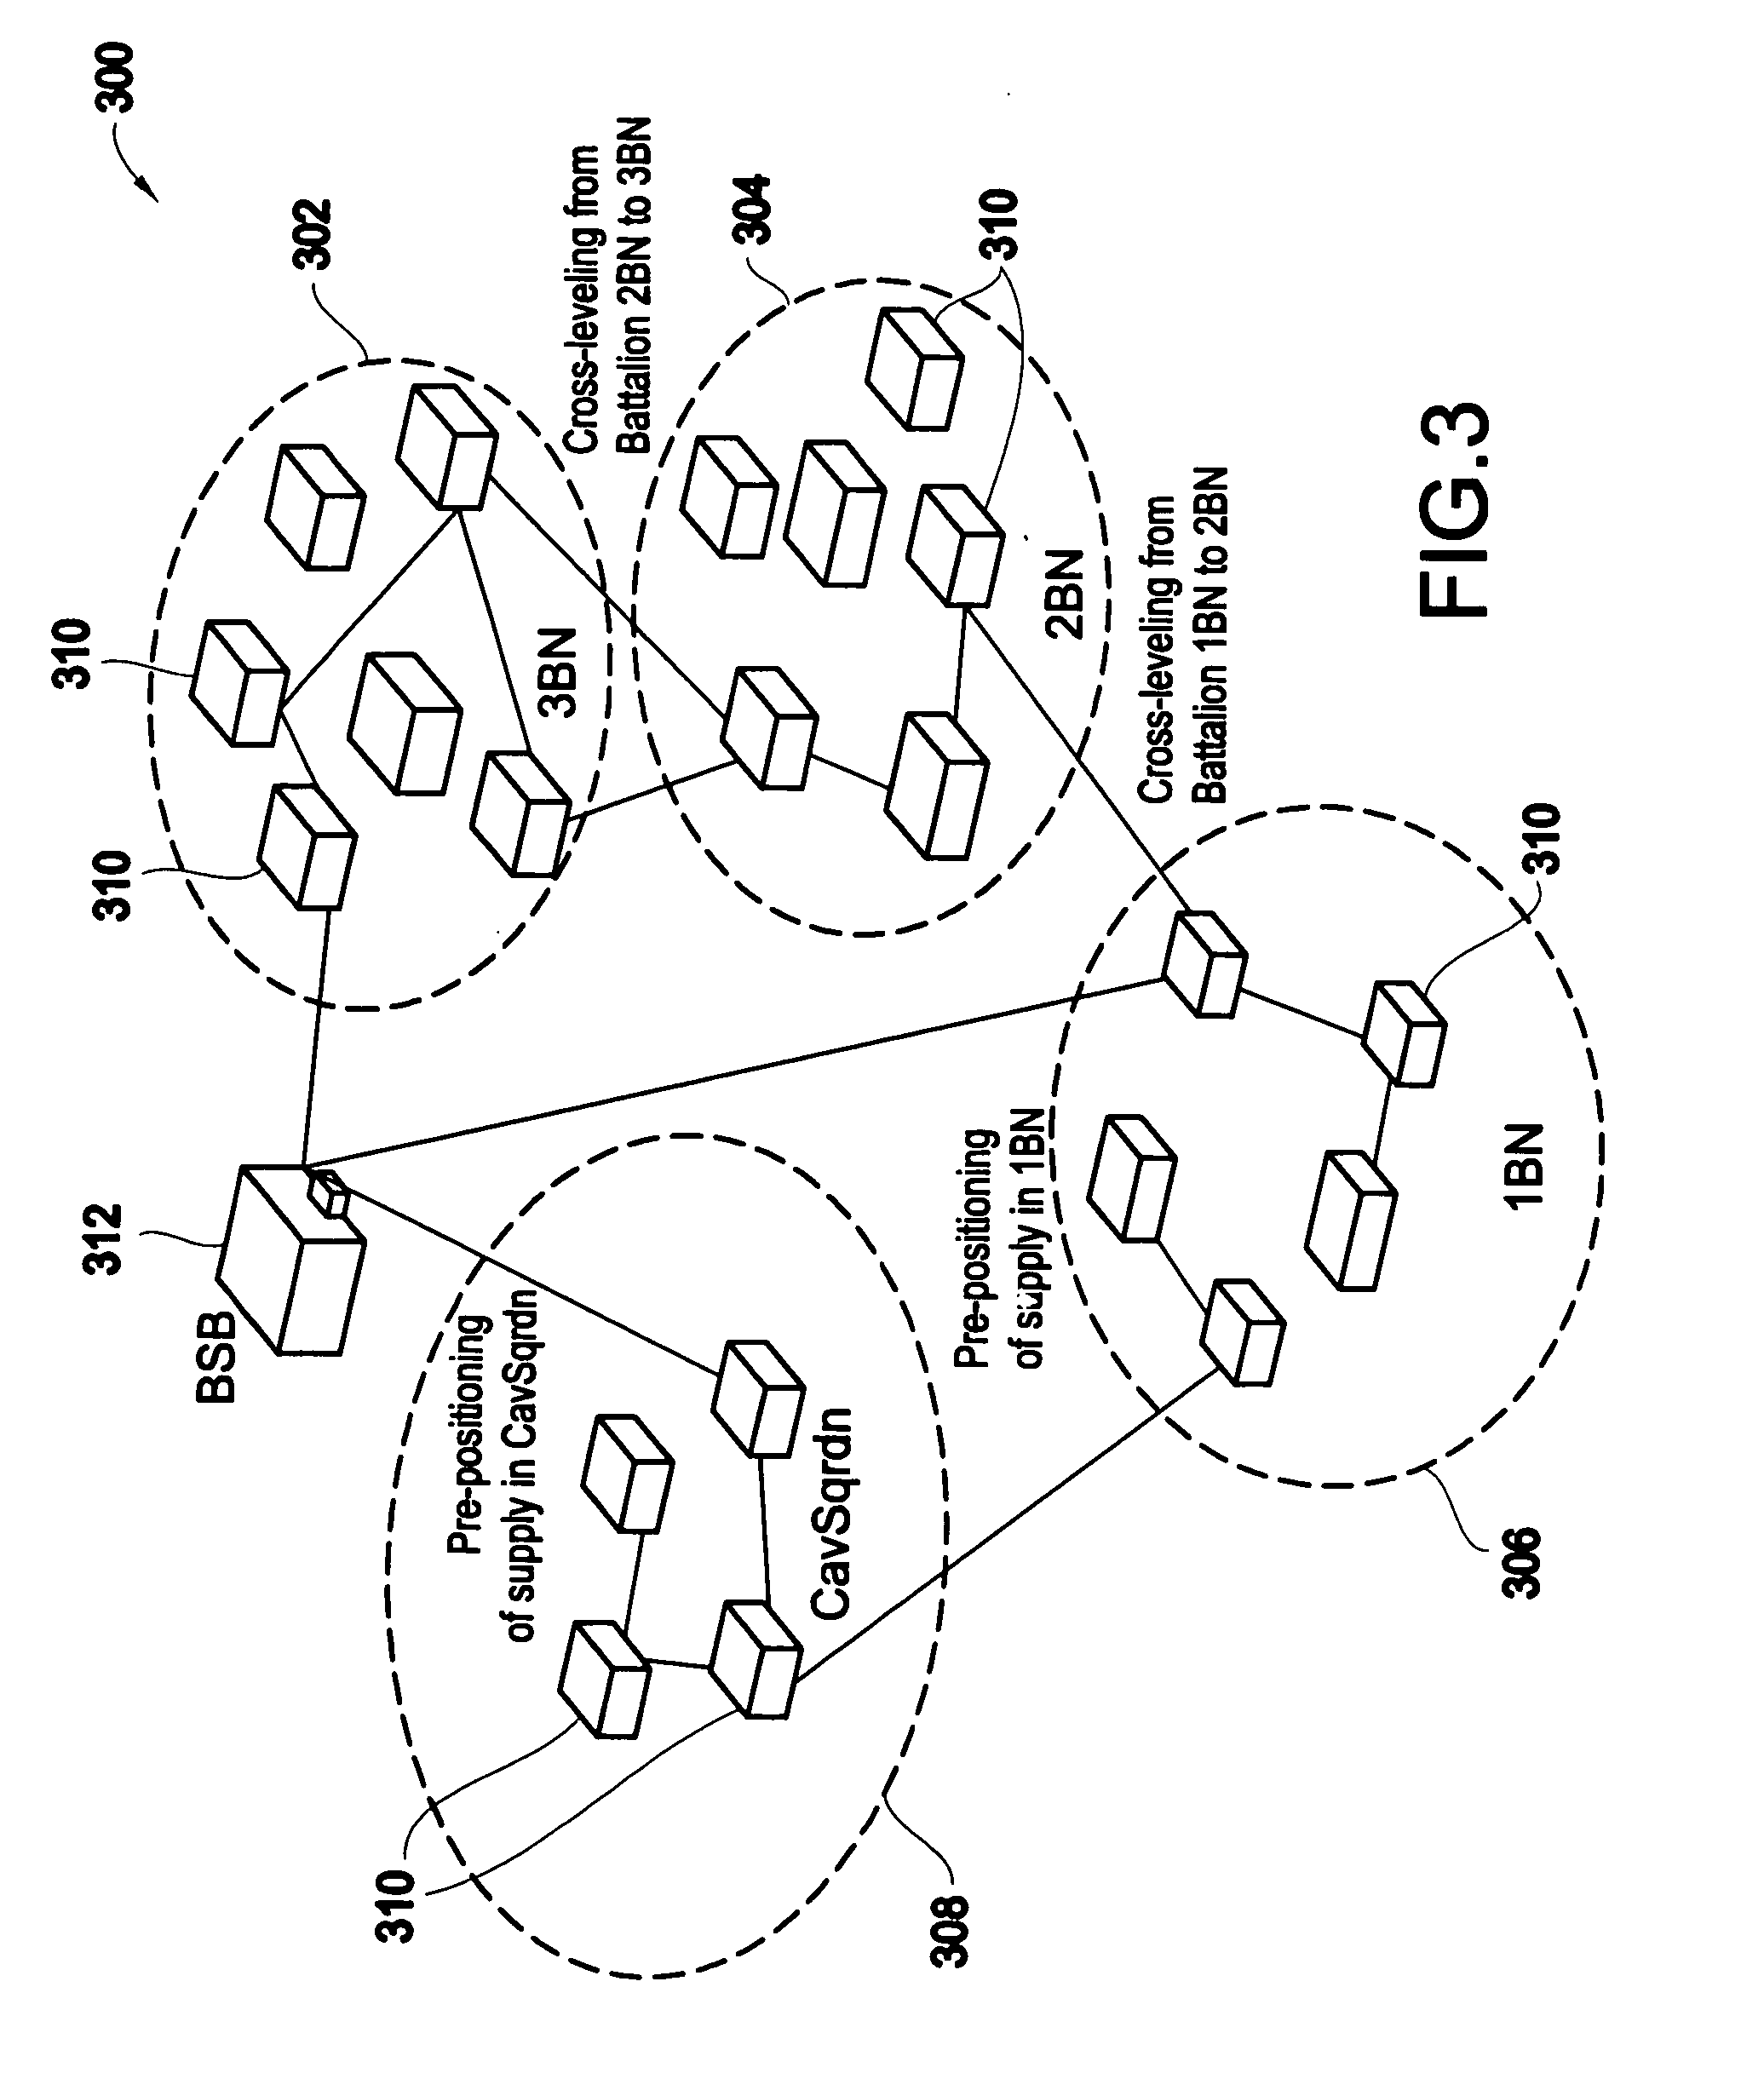 Systems and methods for inventory allocation in mobile logistics networks